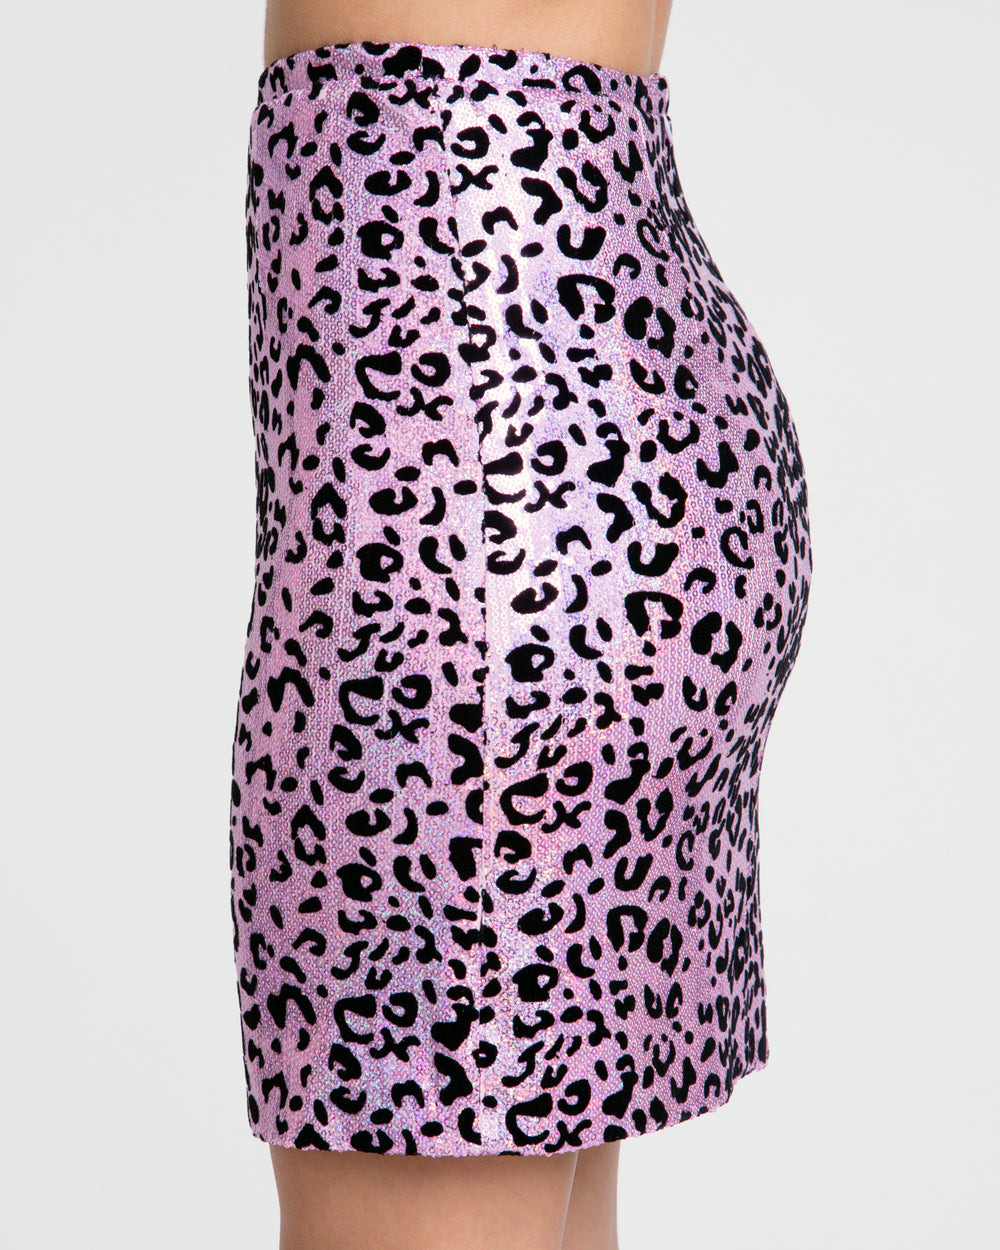 Holographic Leopard Sequin Mini Skirt - Pink